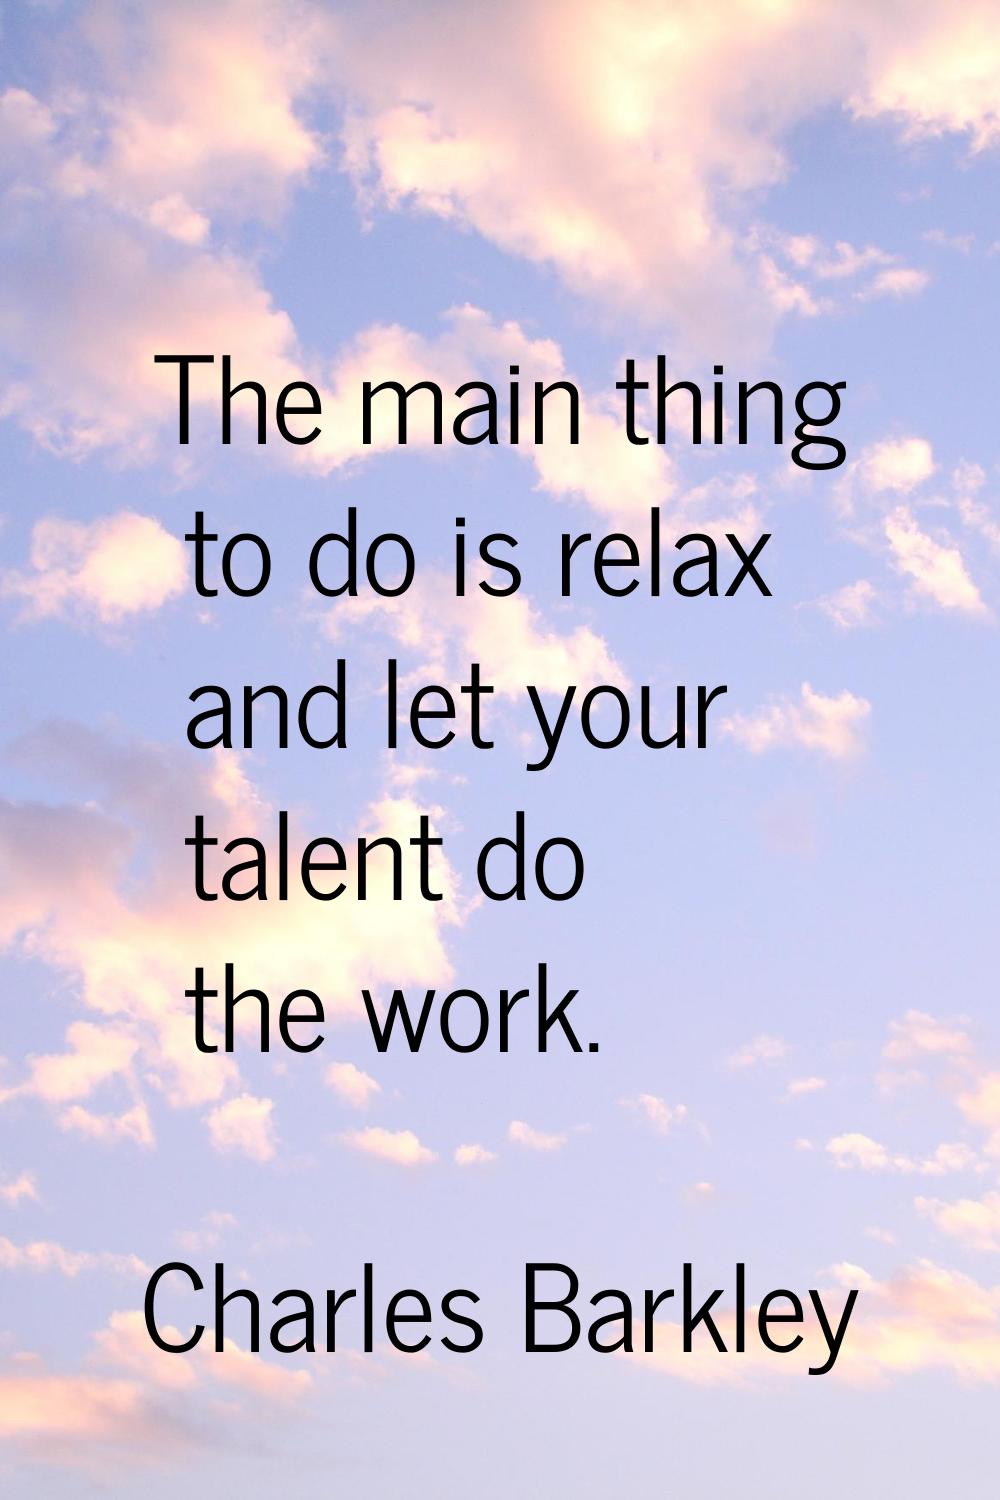 The main thing to do is relax and let your talent do the work.